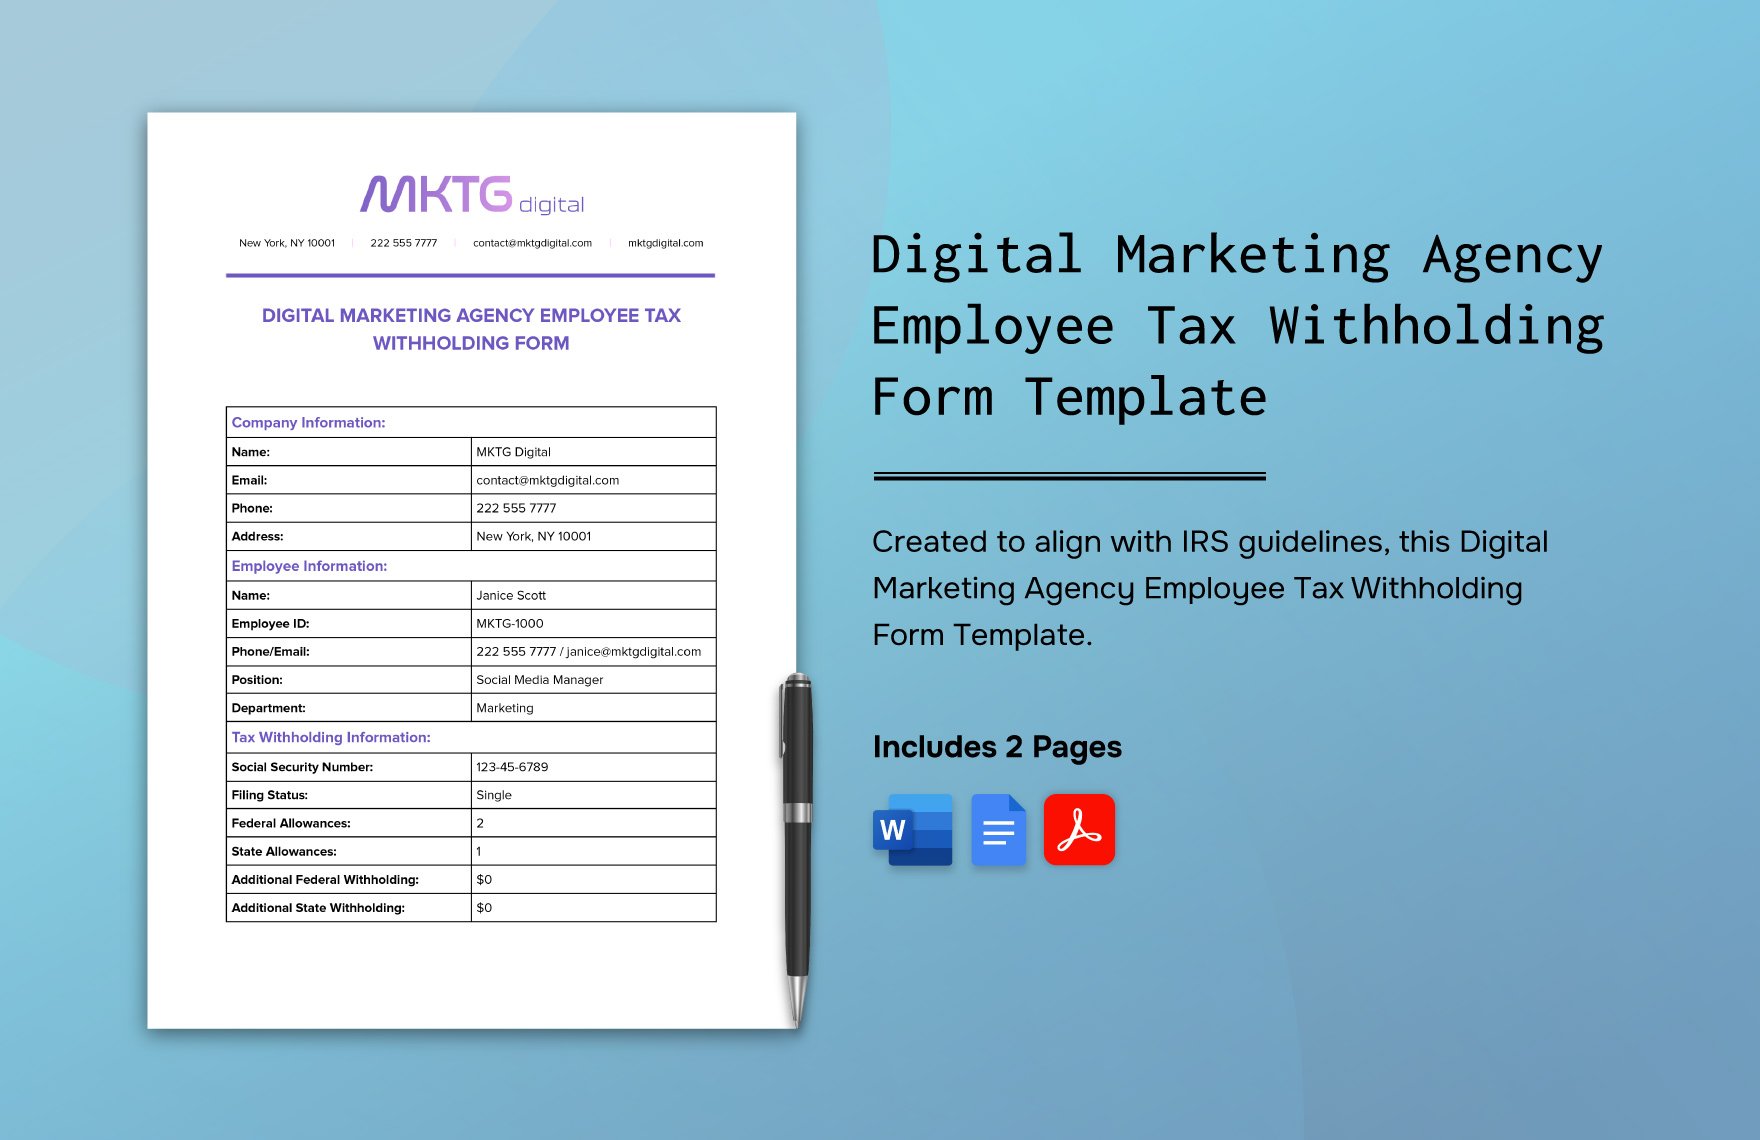 Digital Marketing Agency Employee Tax Withholding Form Template in Word, Google Docs, PDF